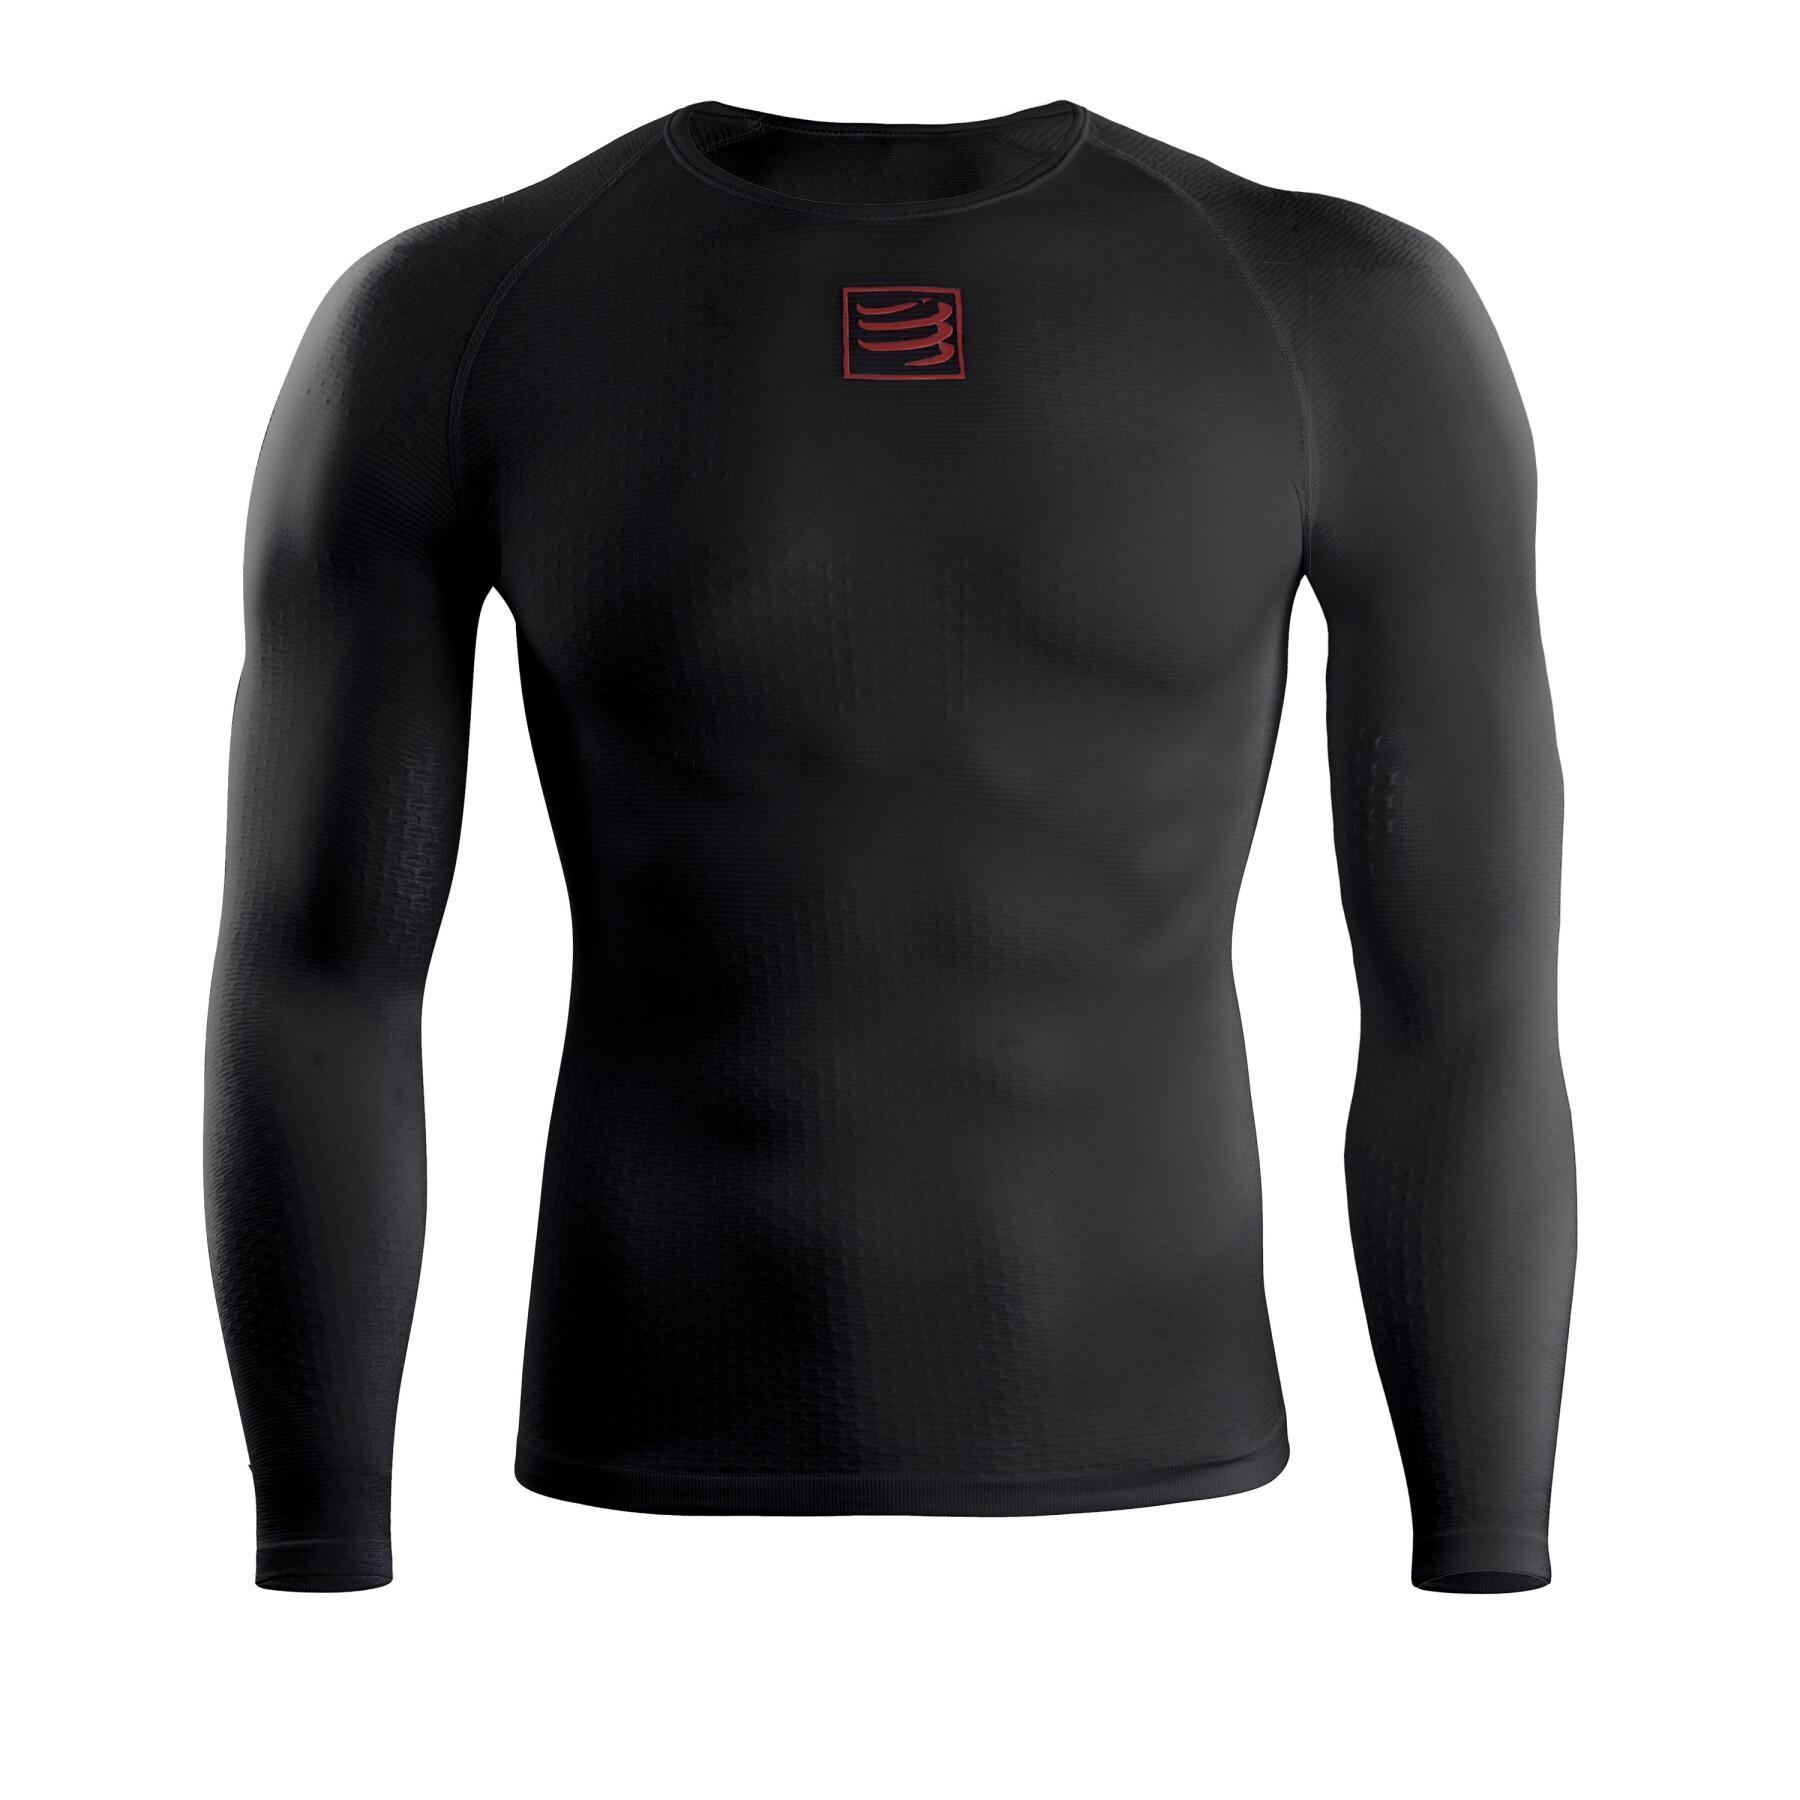 Long sleeve compression jersey Compressport Thermo 3D Ultralight